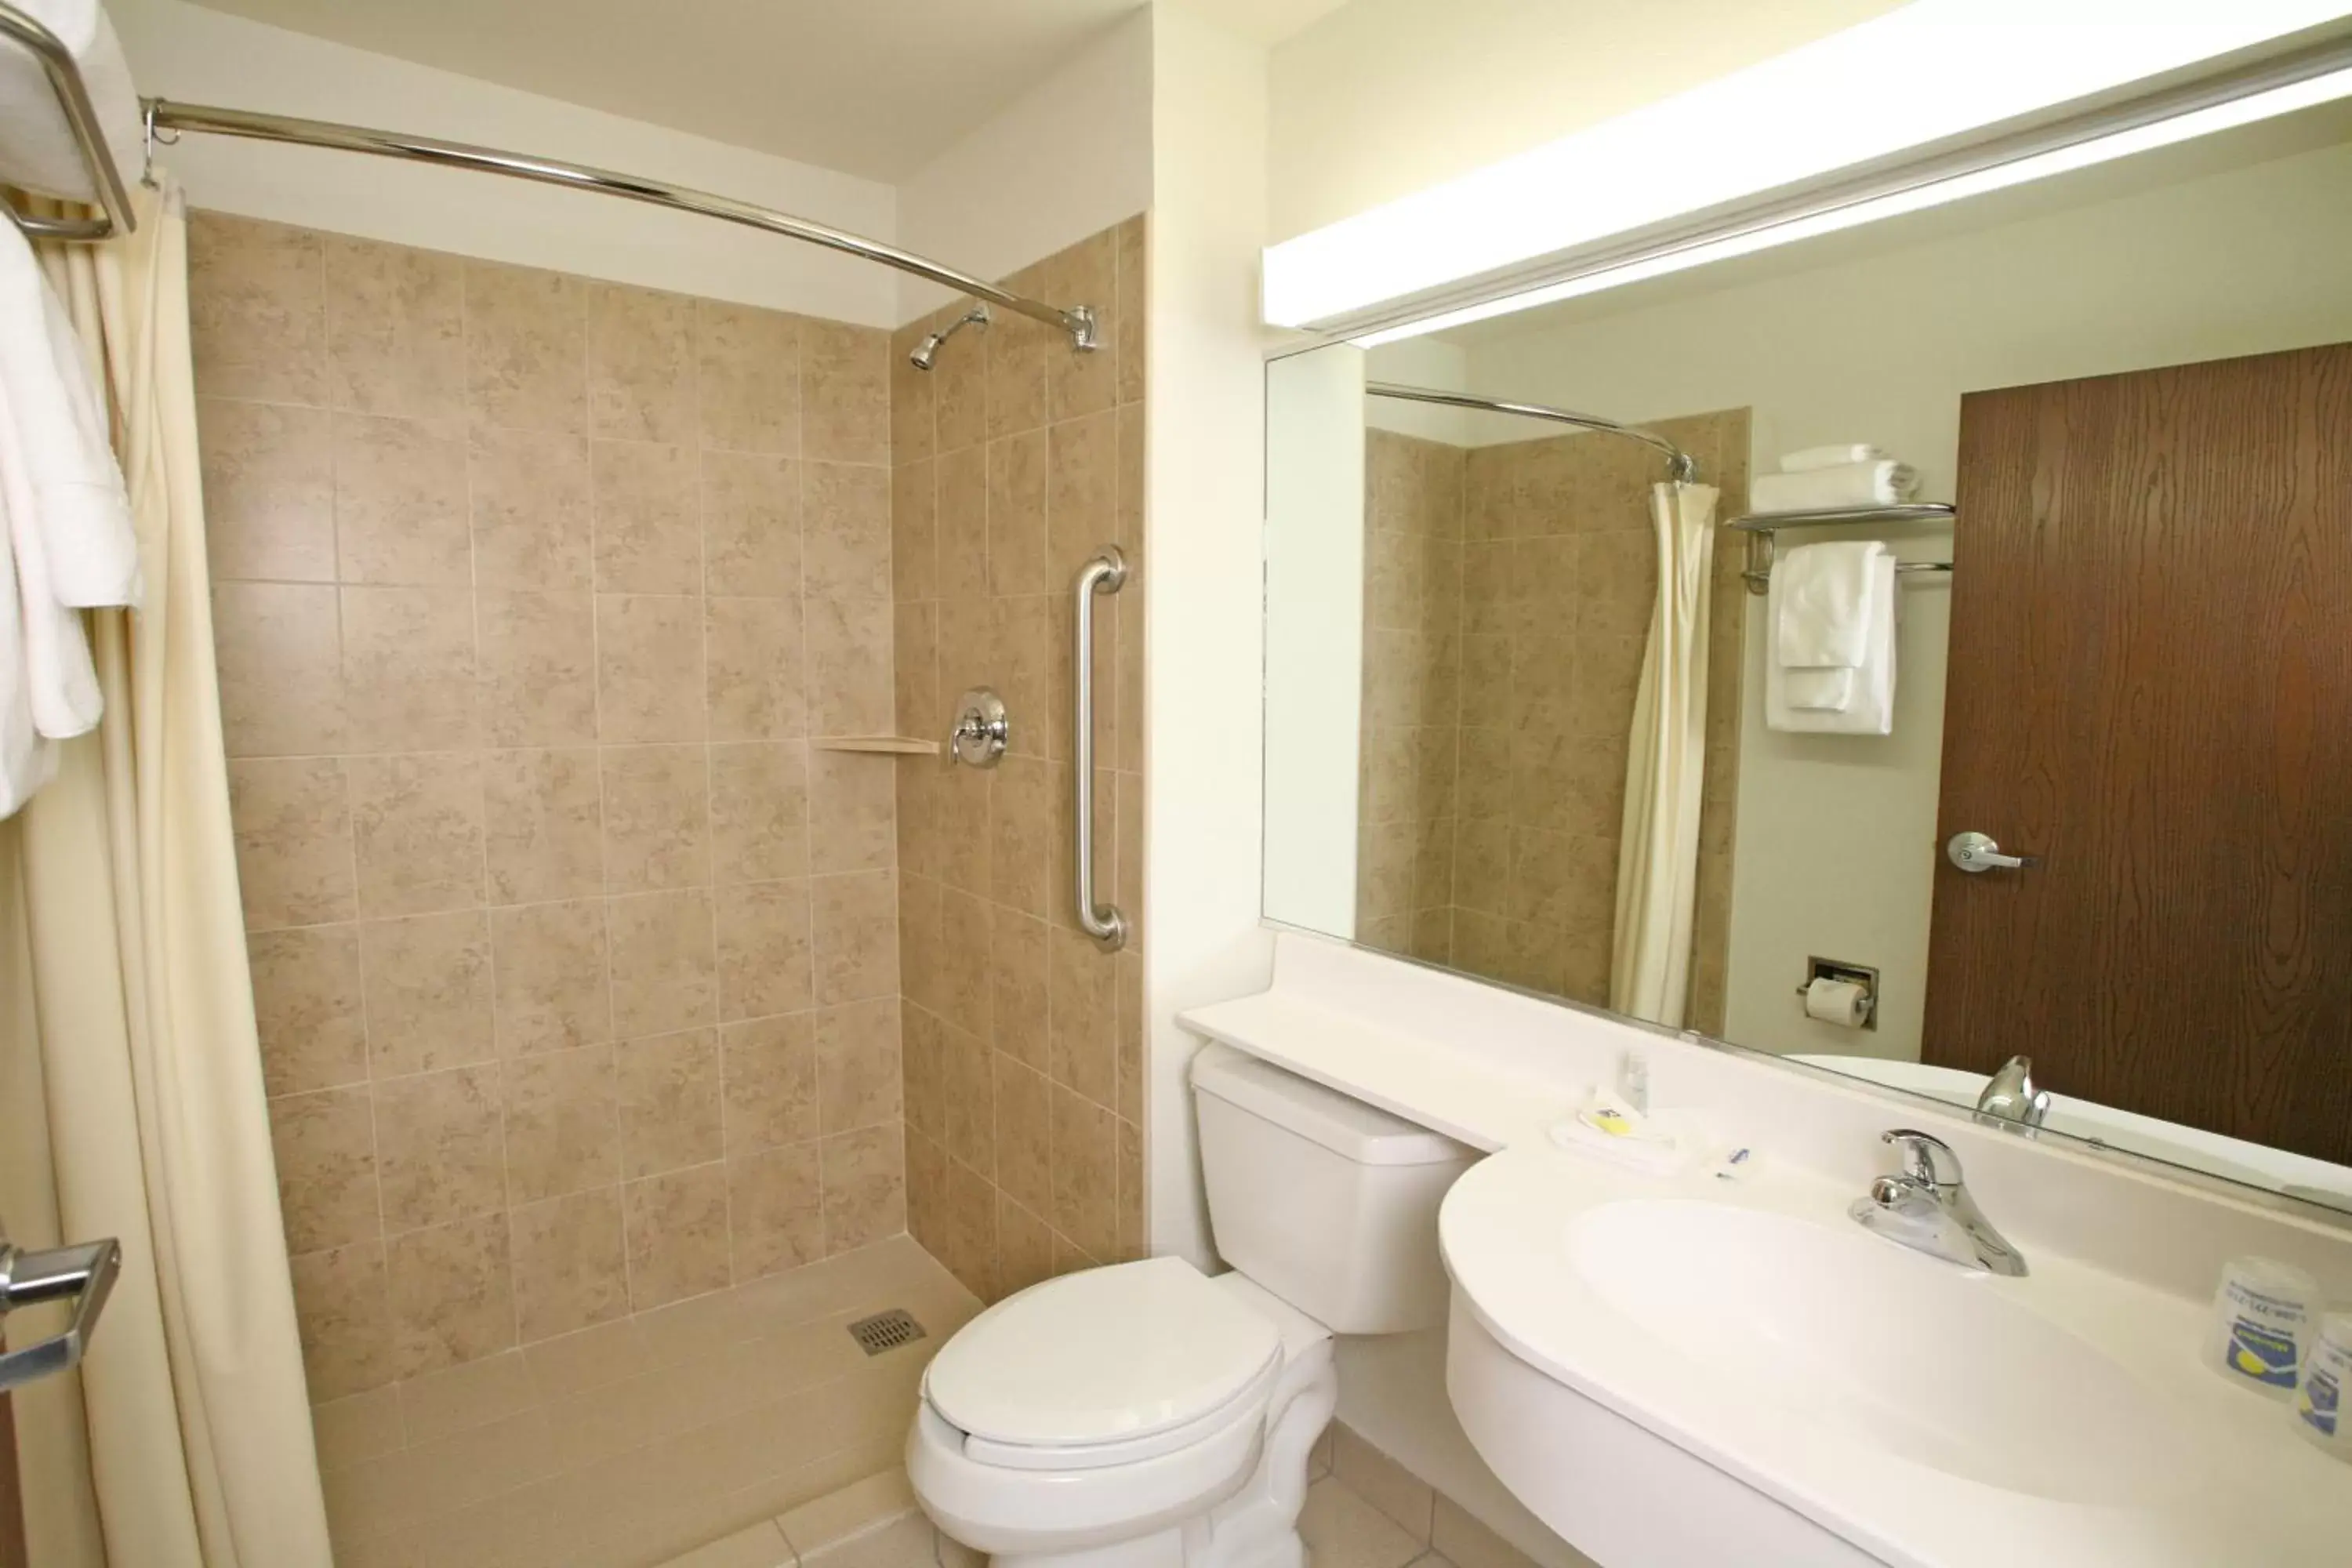 Bathroom in Microtel Inn and Suites by Wyndham Ciudad Juarez, US Consulate